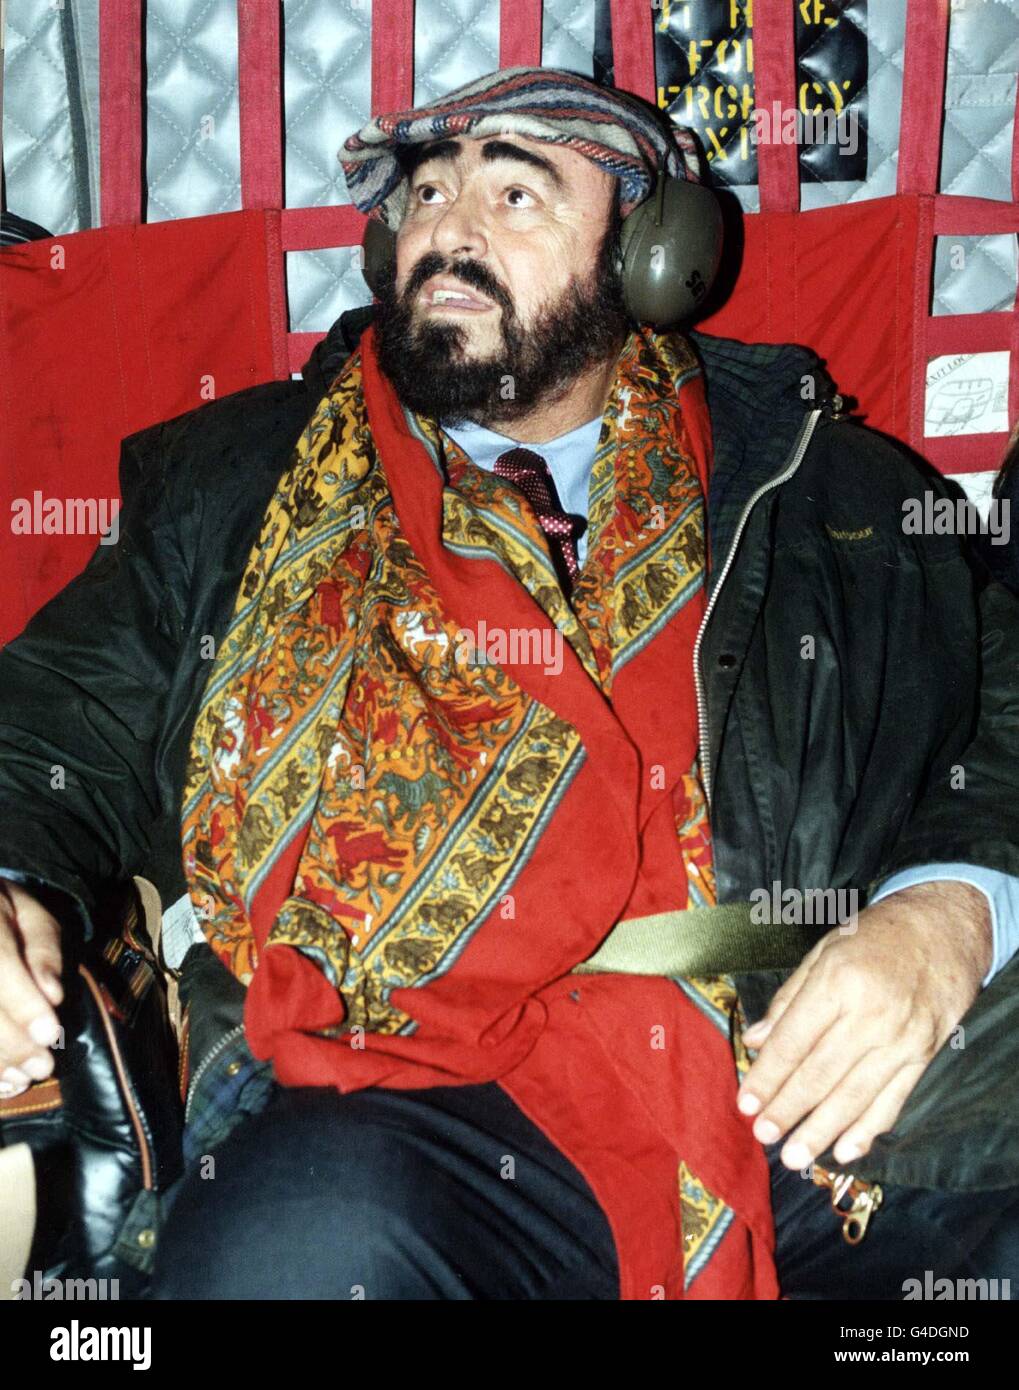 PA NEWS 21/12/97 ITALIAN TENOR LUCIANO PAVAROTTI, PICTURED DURING A CHINOOK HELICOPTER FLIGHT TO SOUTH BOSNIA WHERE HE OPENED A MUSIC CENTRE IN MOSTAR. THE CENTRE WILL PROVIDE MUSIC THERAPY FOR THE YOUNG SURVIVORS OF THE BOSNIAN WAR. Stock Photo